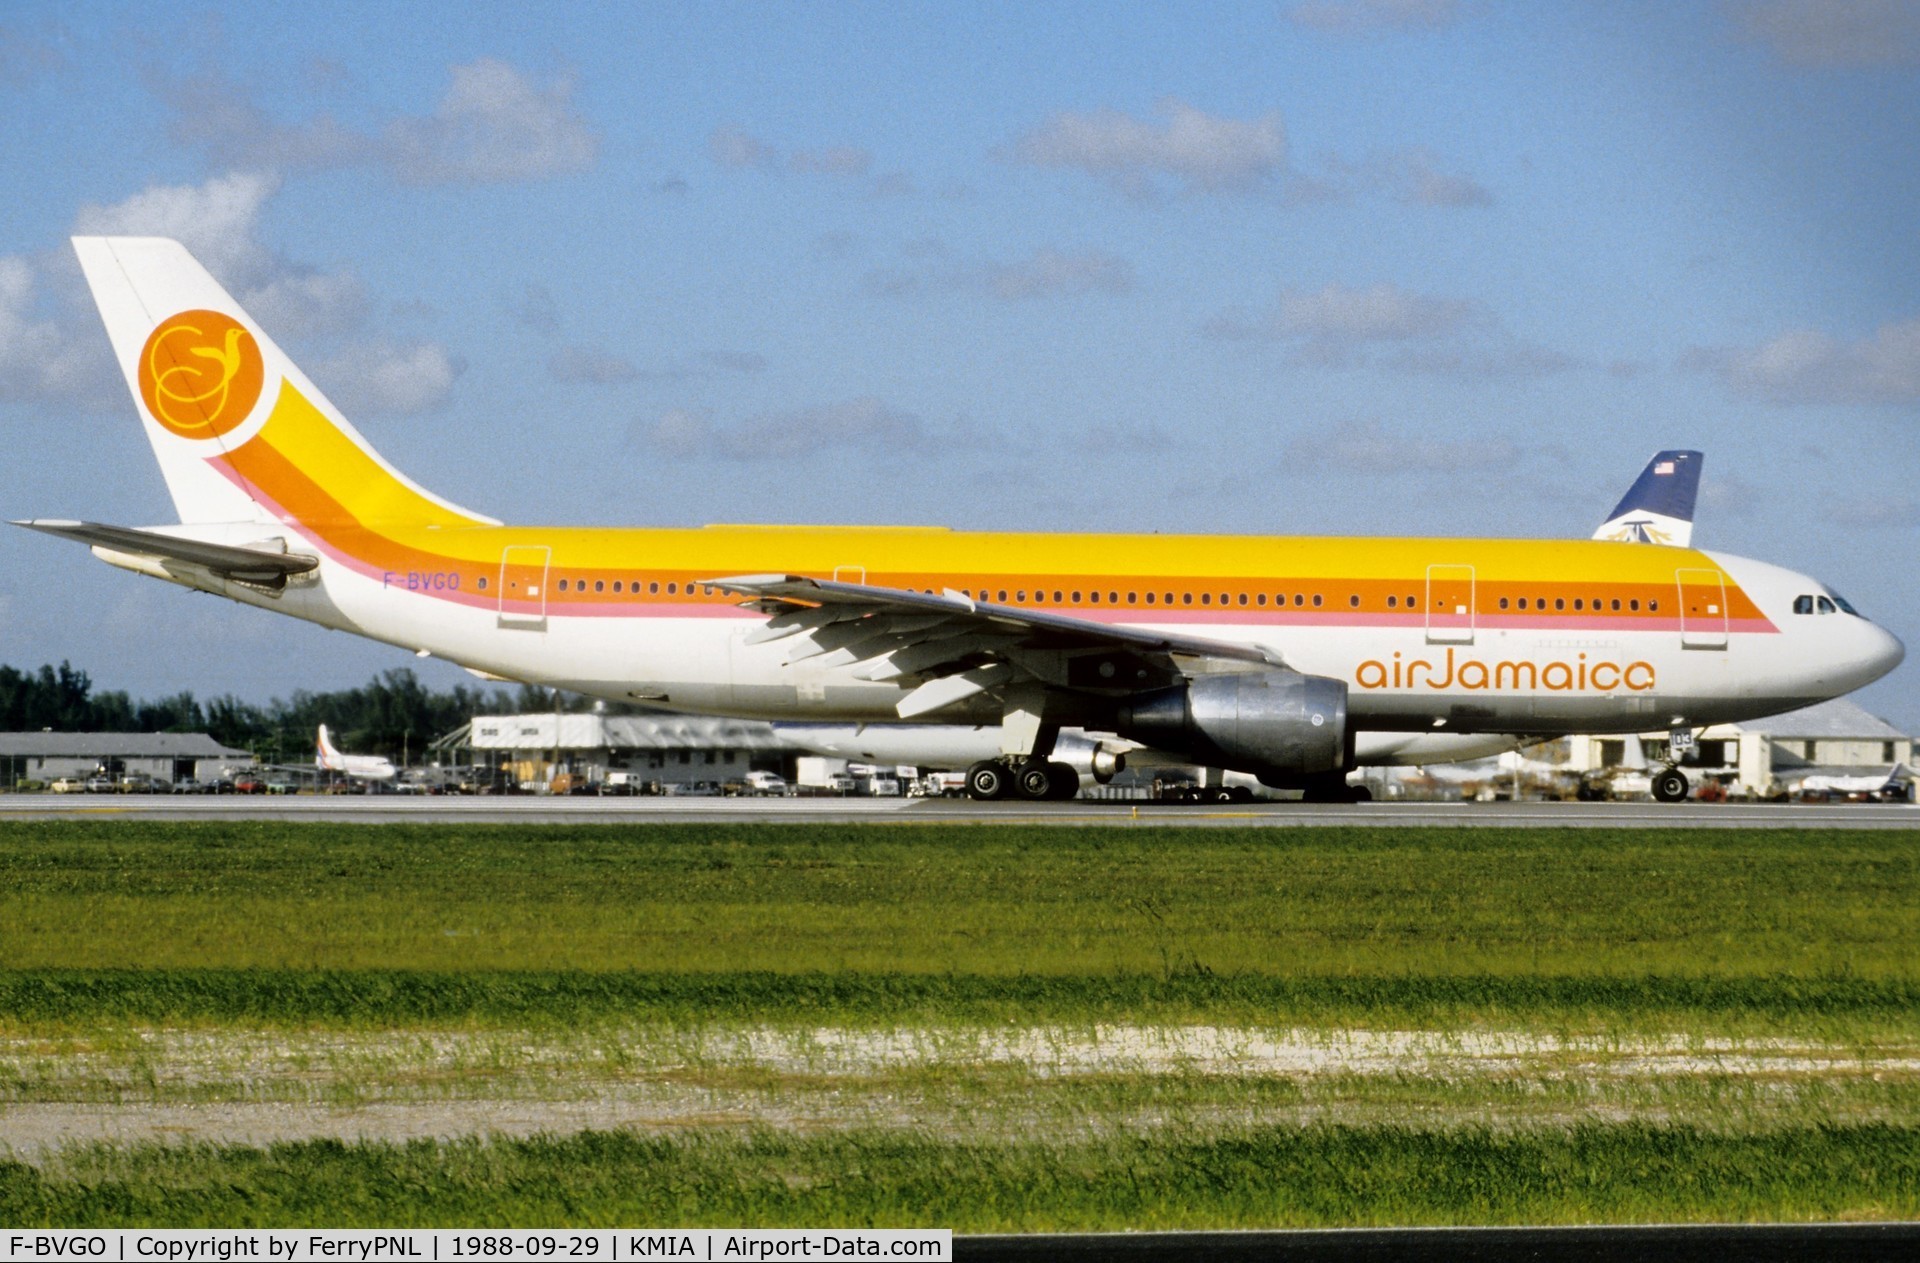 F-BVGO, 1981 Airbus A300B4-203 C/N 129, Air Jamaica A300 lined-up for departure